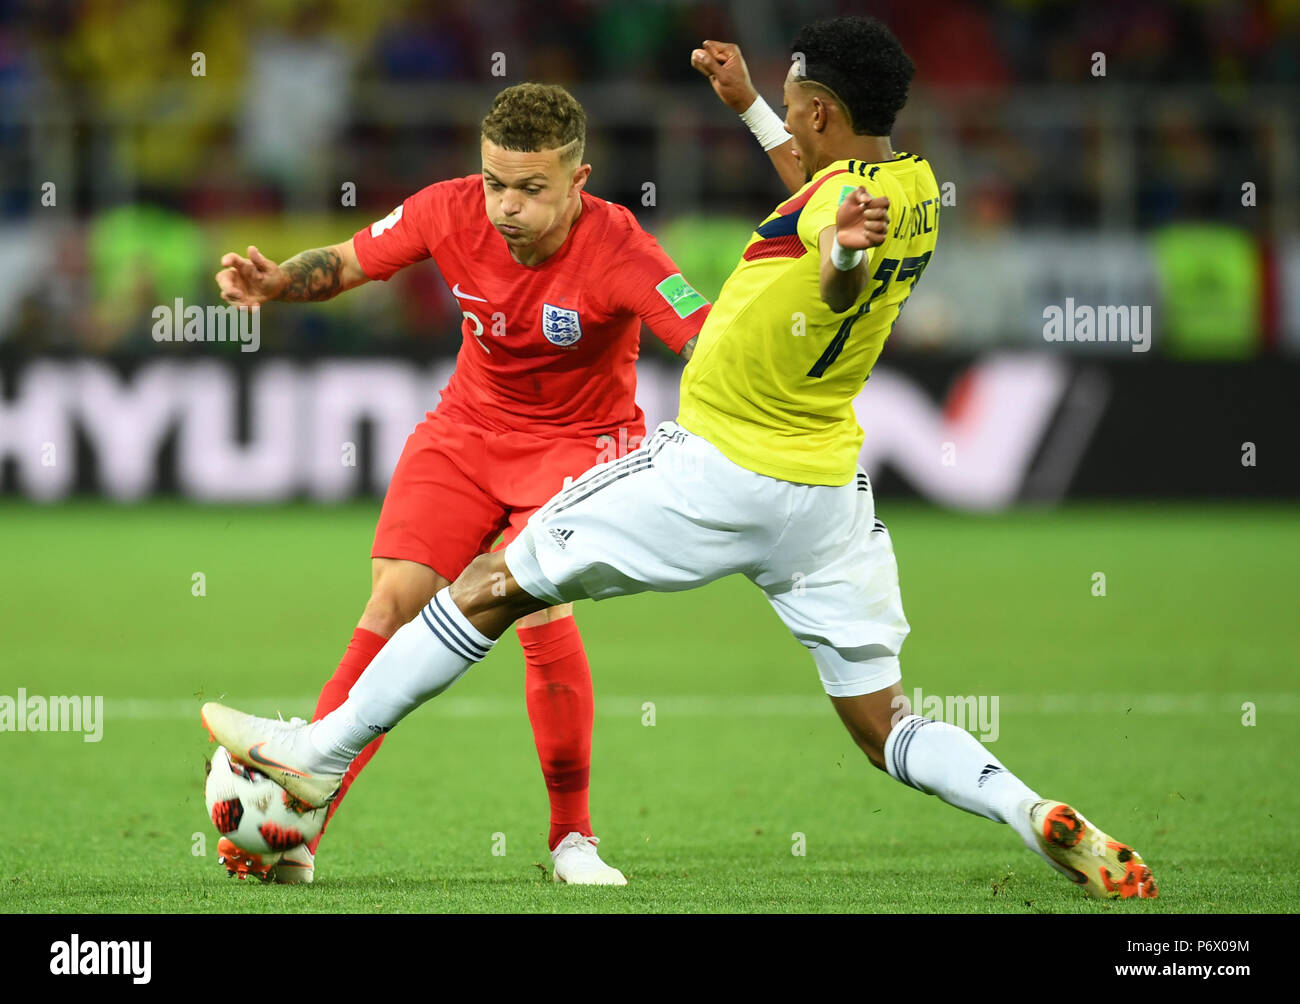 Moscow, Russia. 3rd July, 2018. Kieran Trippier (L) of England vies with Johan Mojica of Colombia during the 2018 FIFA World Cup round of 16 match between England and Colombia in Moscow, Russia, July 3, 2018. Credit: Du Yu/Xinhua/Alamy Live News Stock Photo